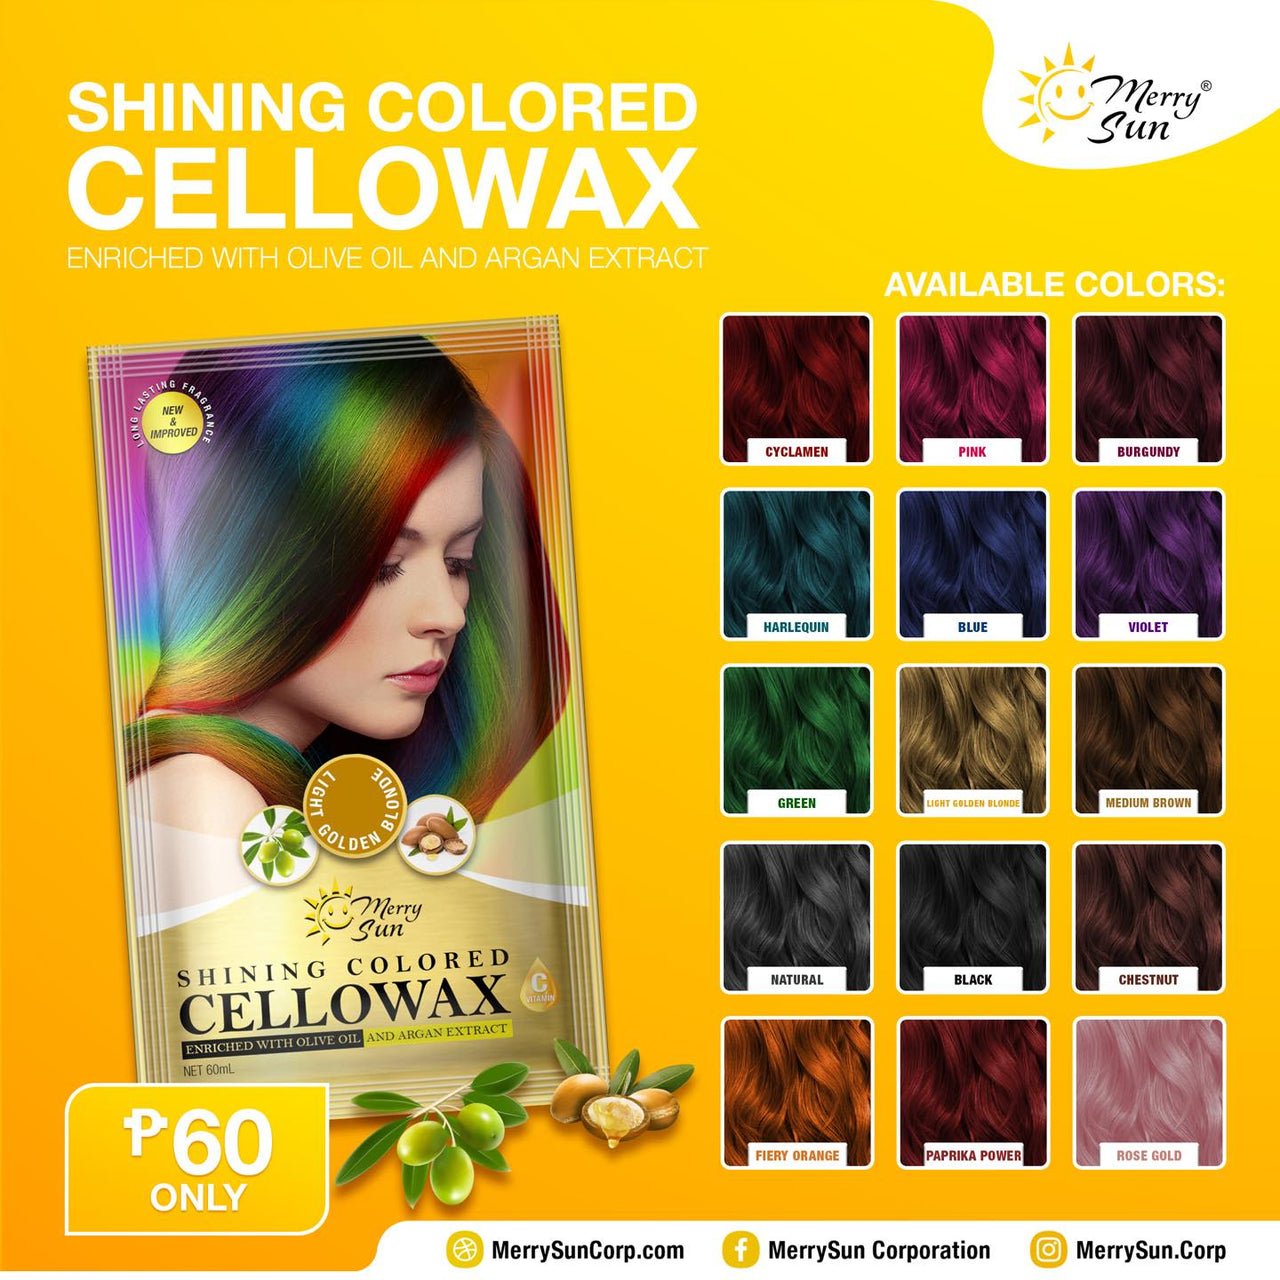 Merry Sun Natural Sun Shining Colored Cellowax Hair Color without stimulation (60ml)